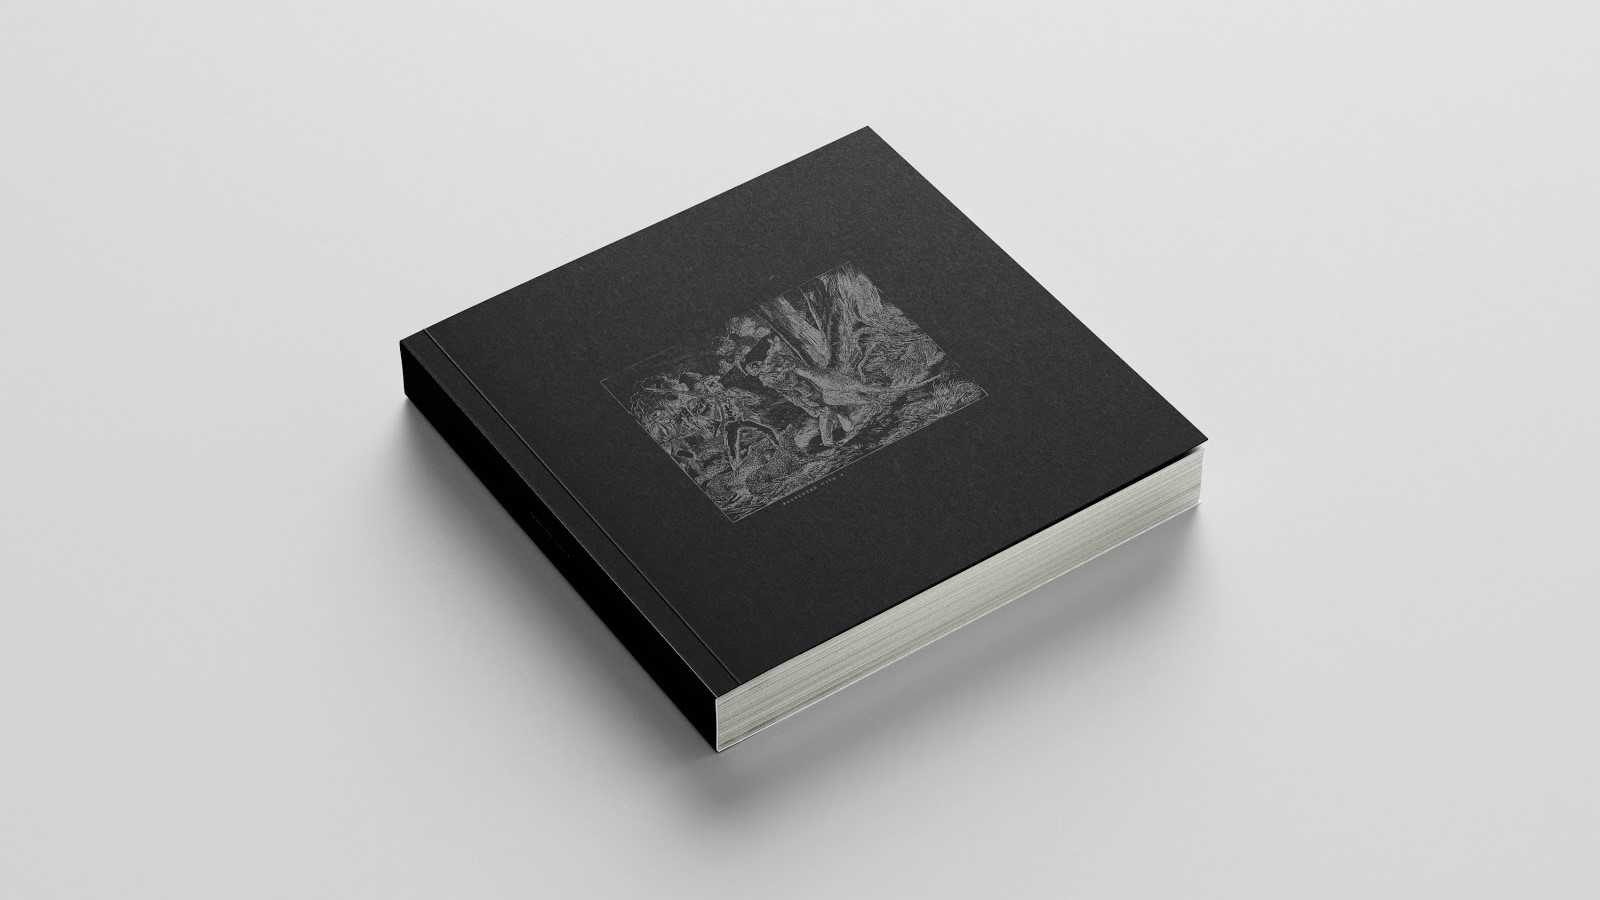 Encounter With, A square black book on a white background.